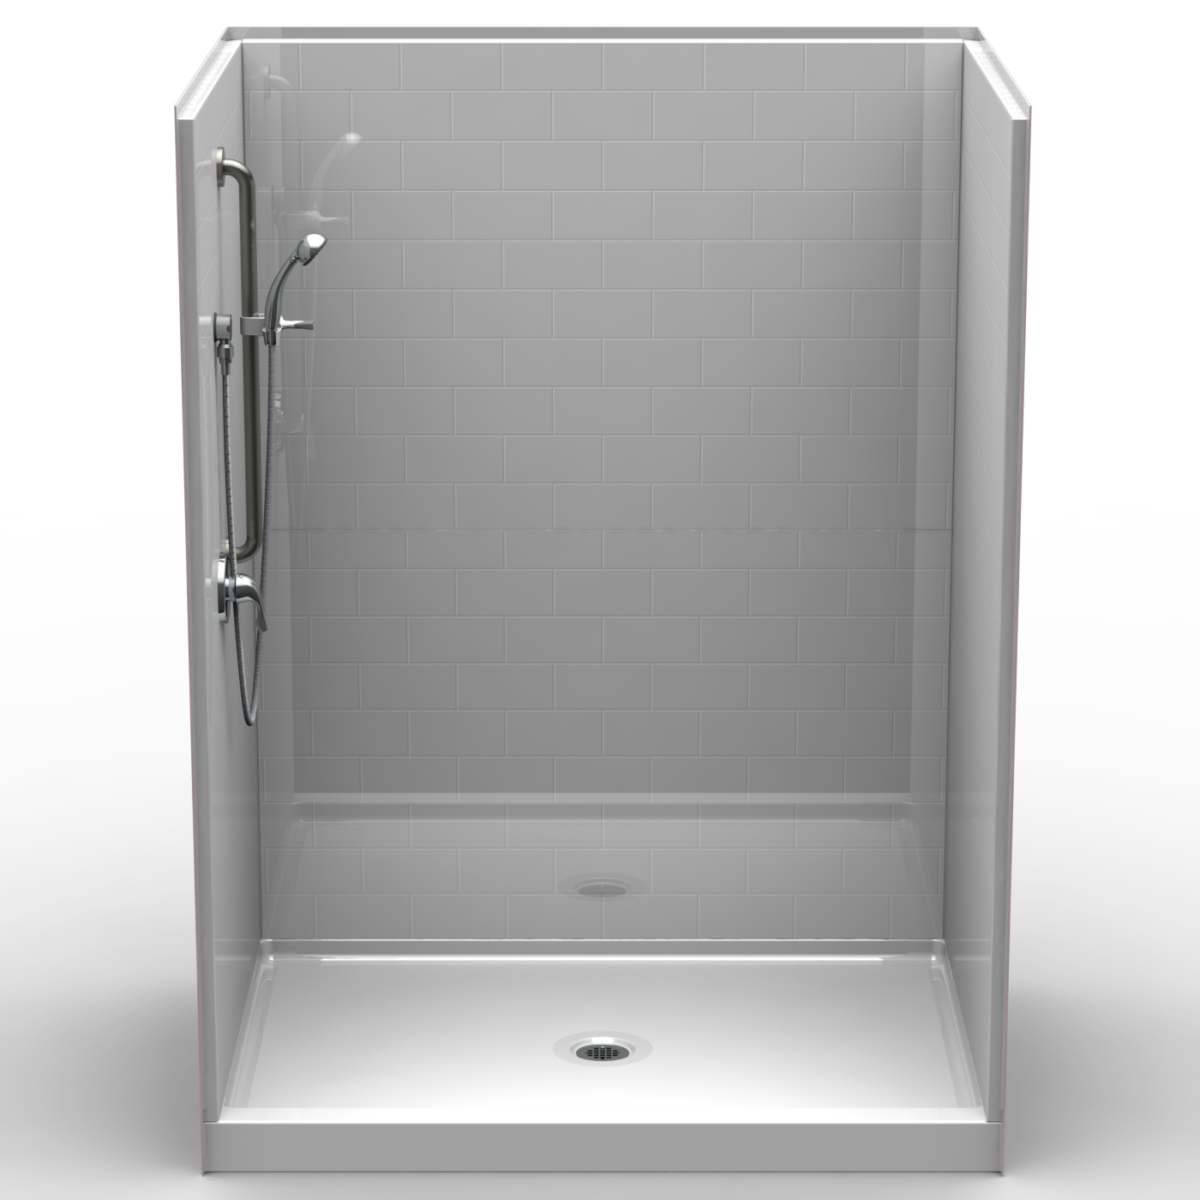 5LBS6042FB.V2, Five Piece 60” x 42” Curbed Shower, 4” Threshold, Centre Drain, “Subway Tile”